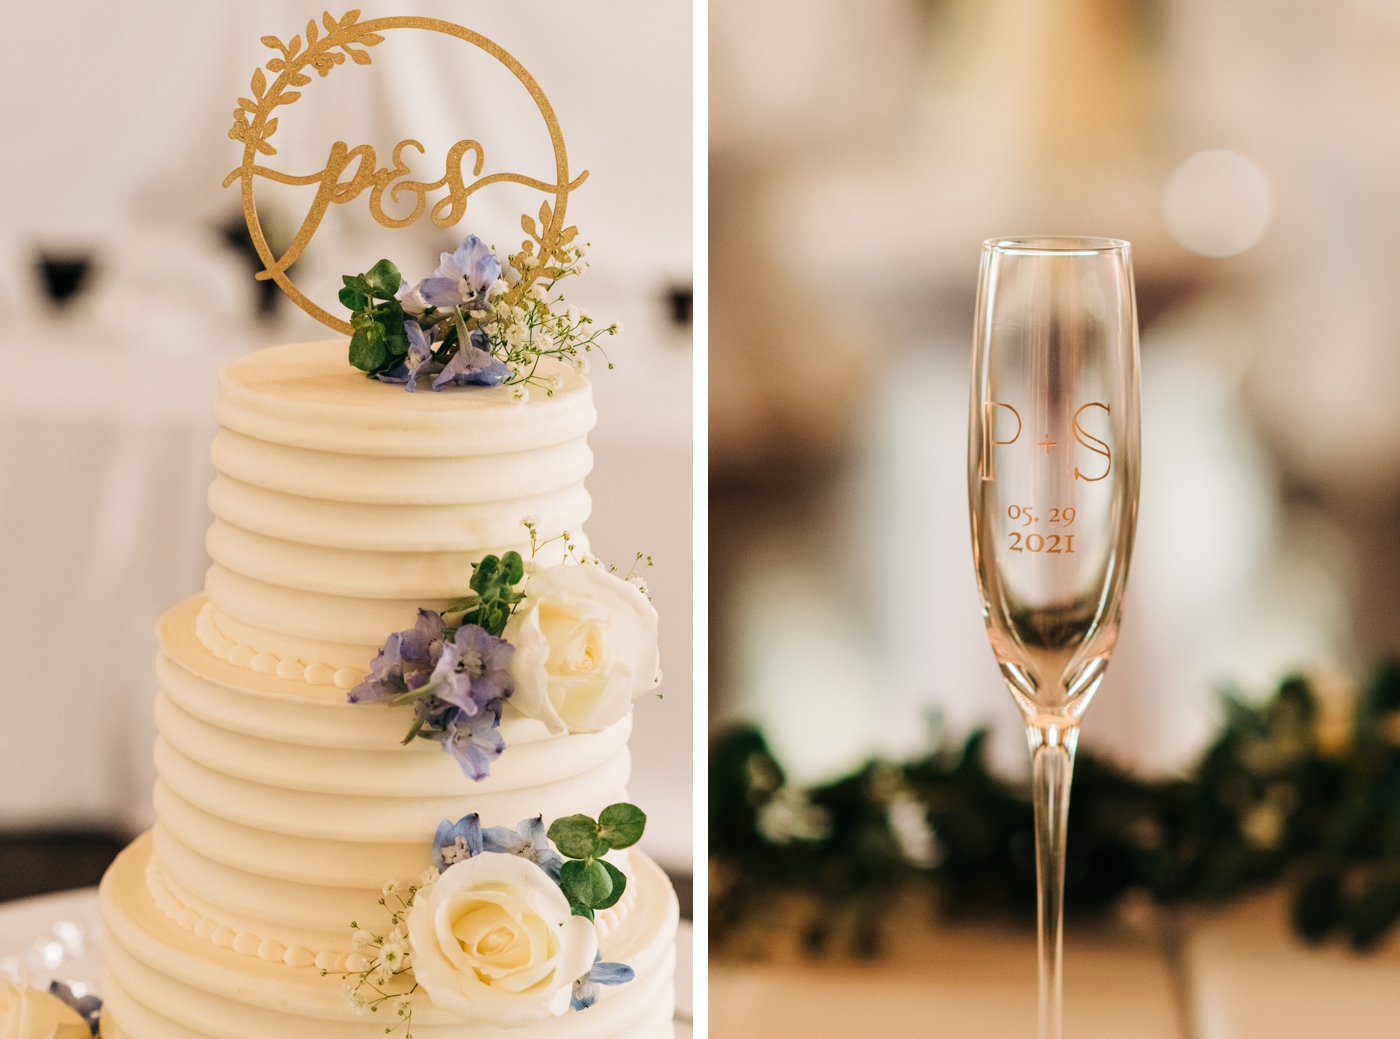 Wedding cake and champagne details